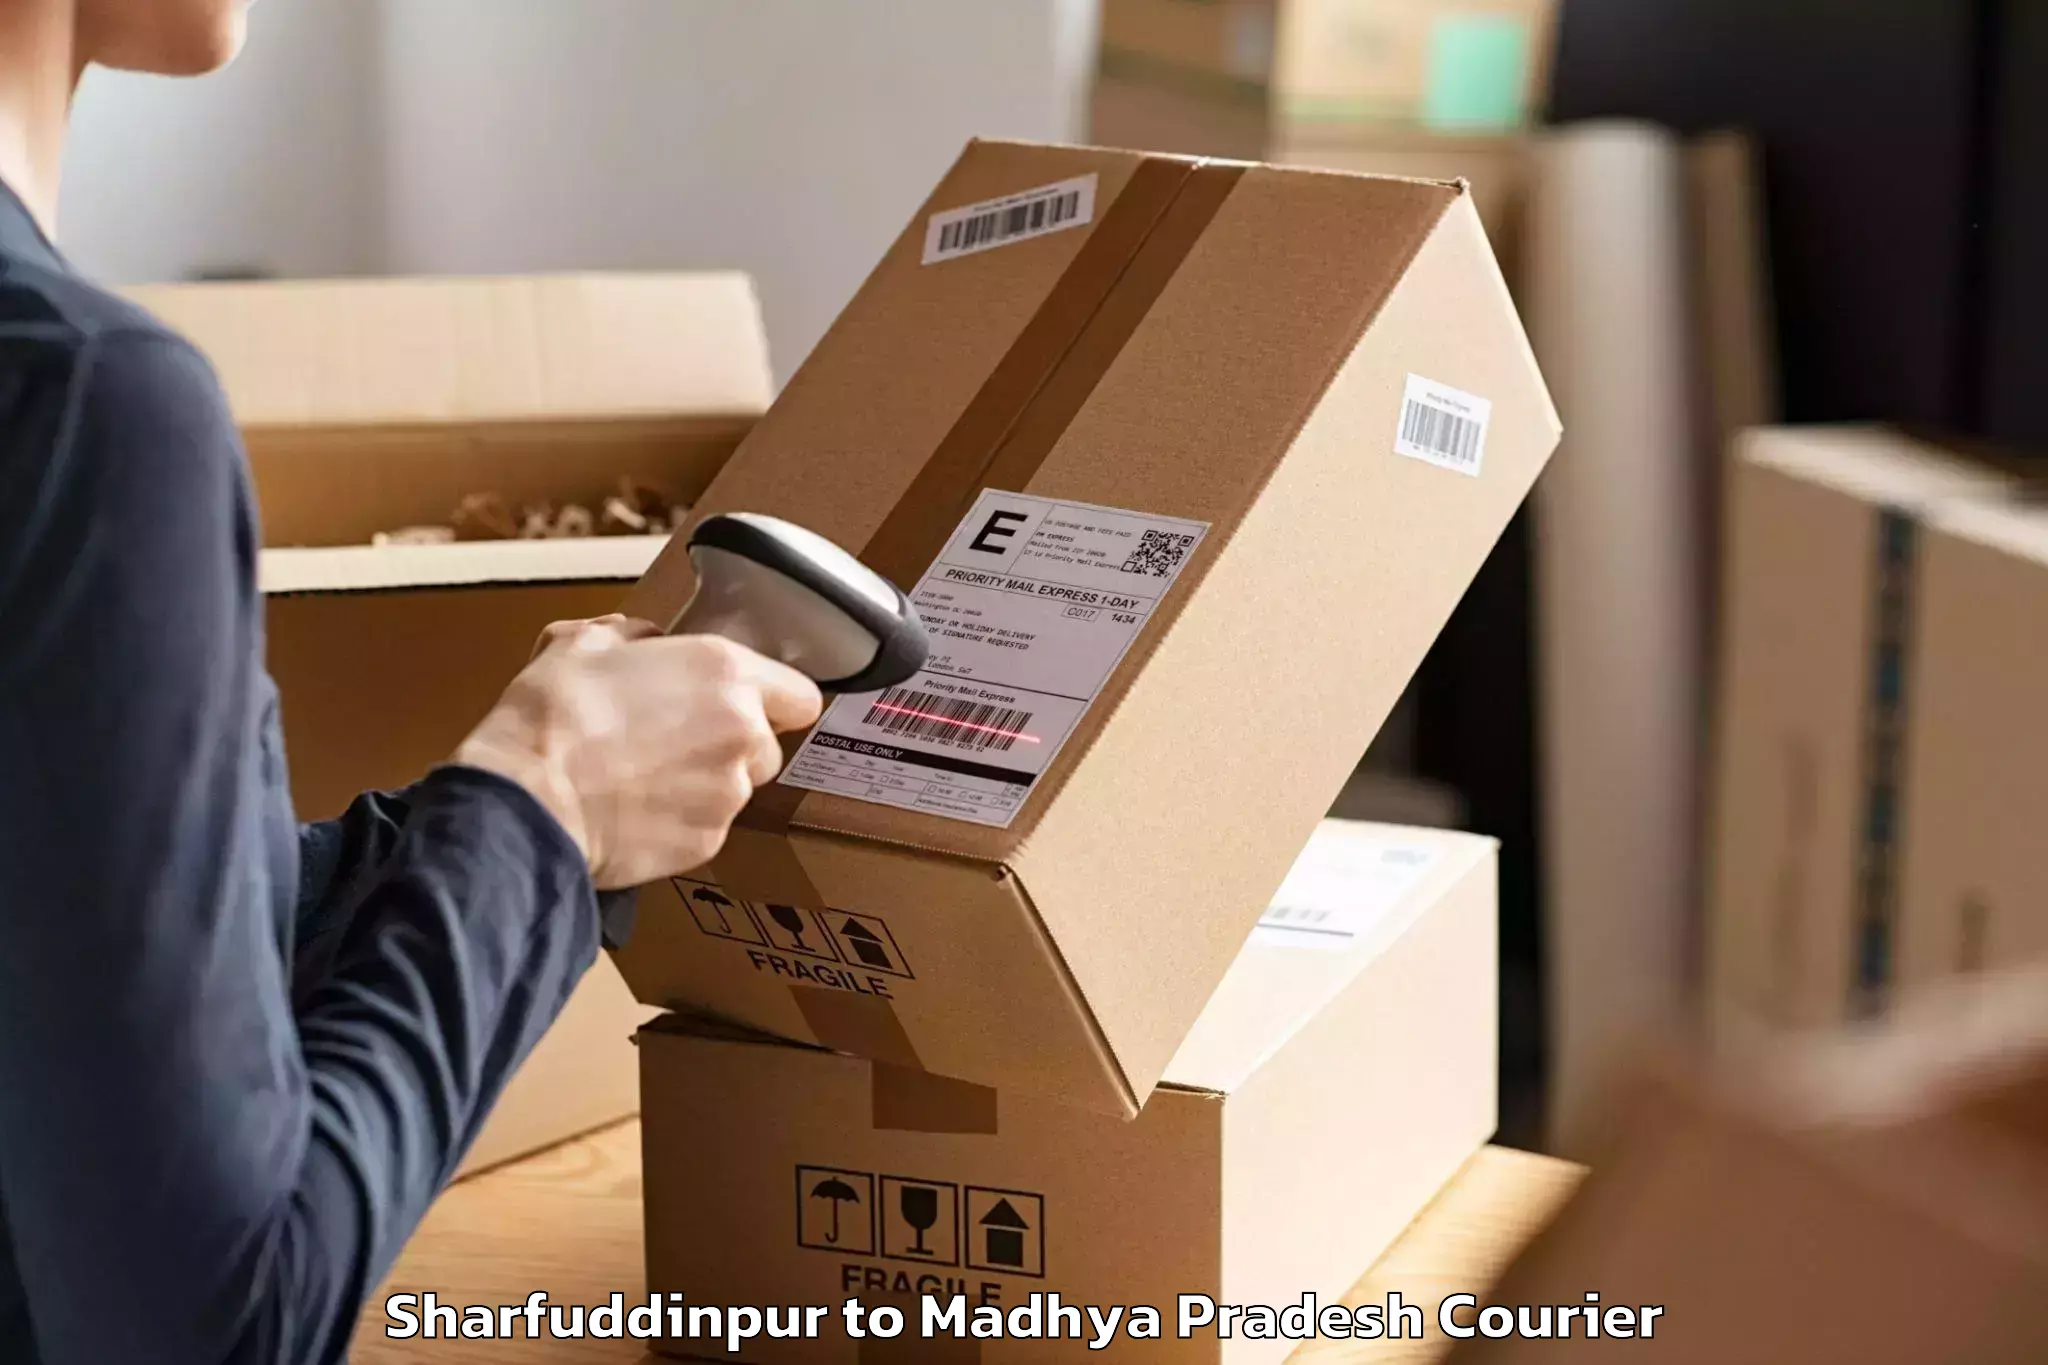 Furniture transport solutions Sharfuddinpur to Alote